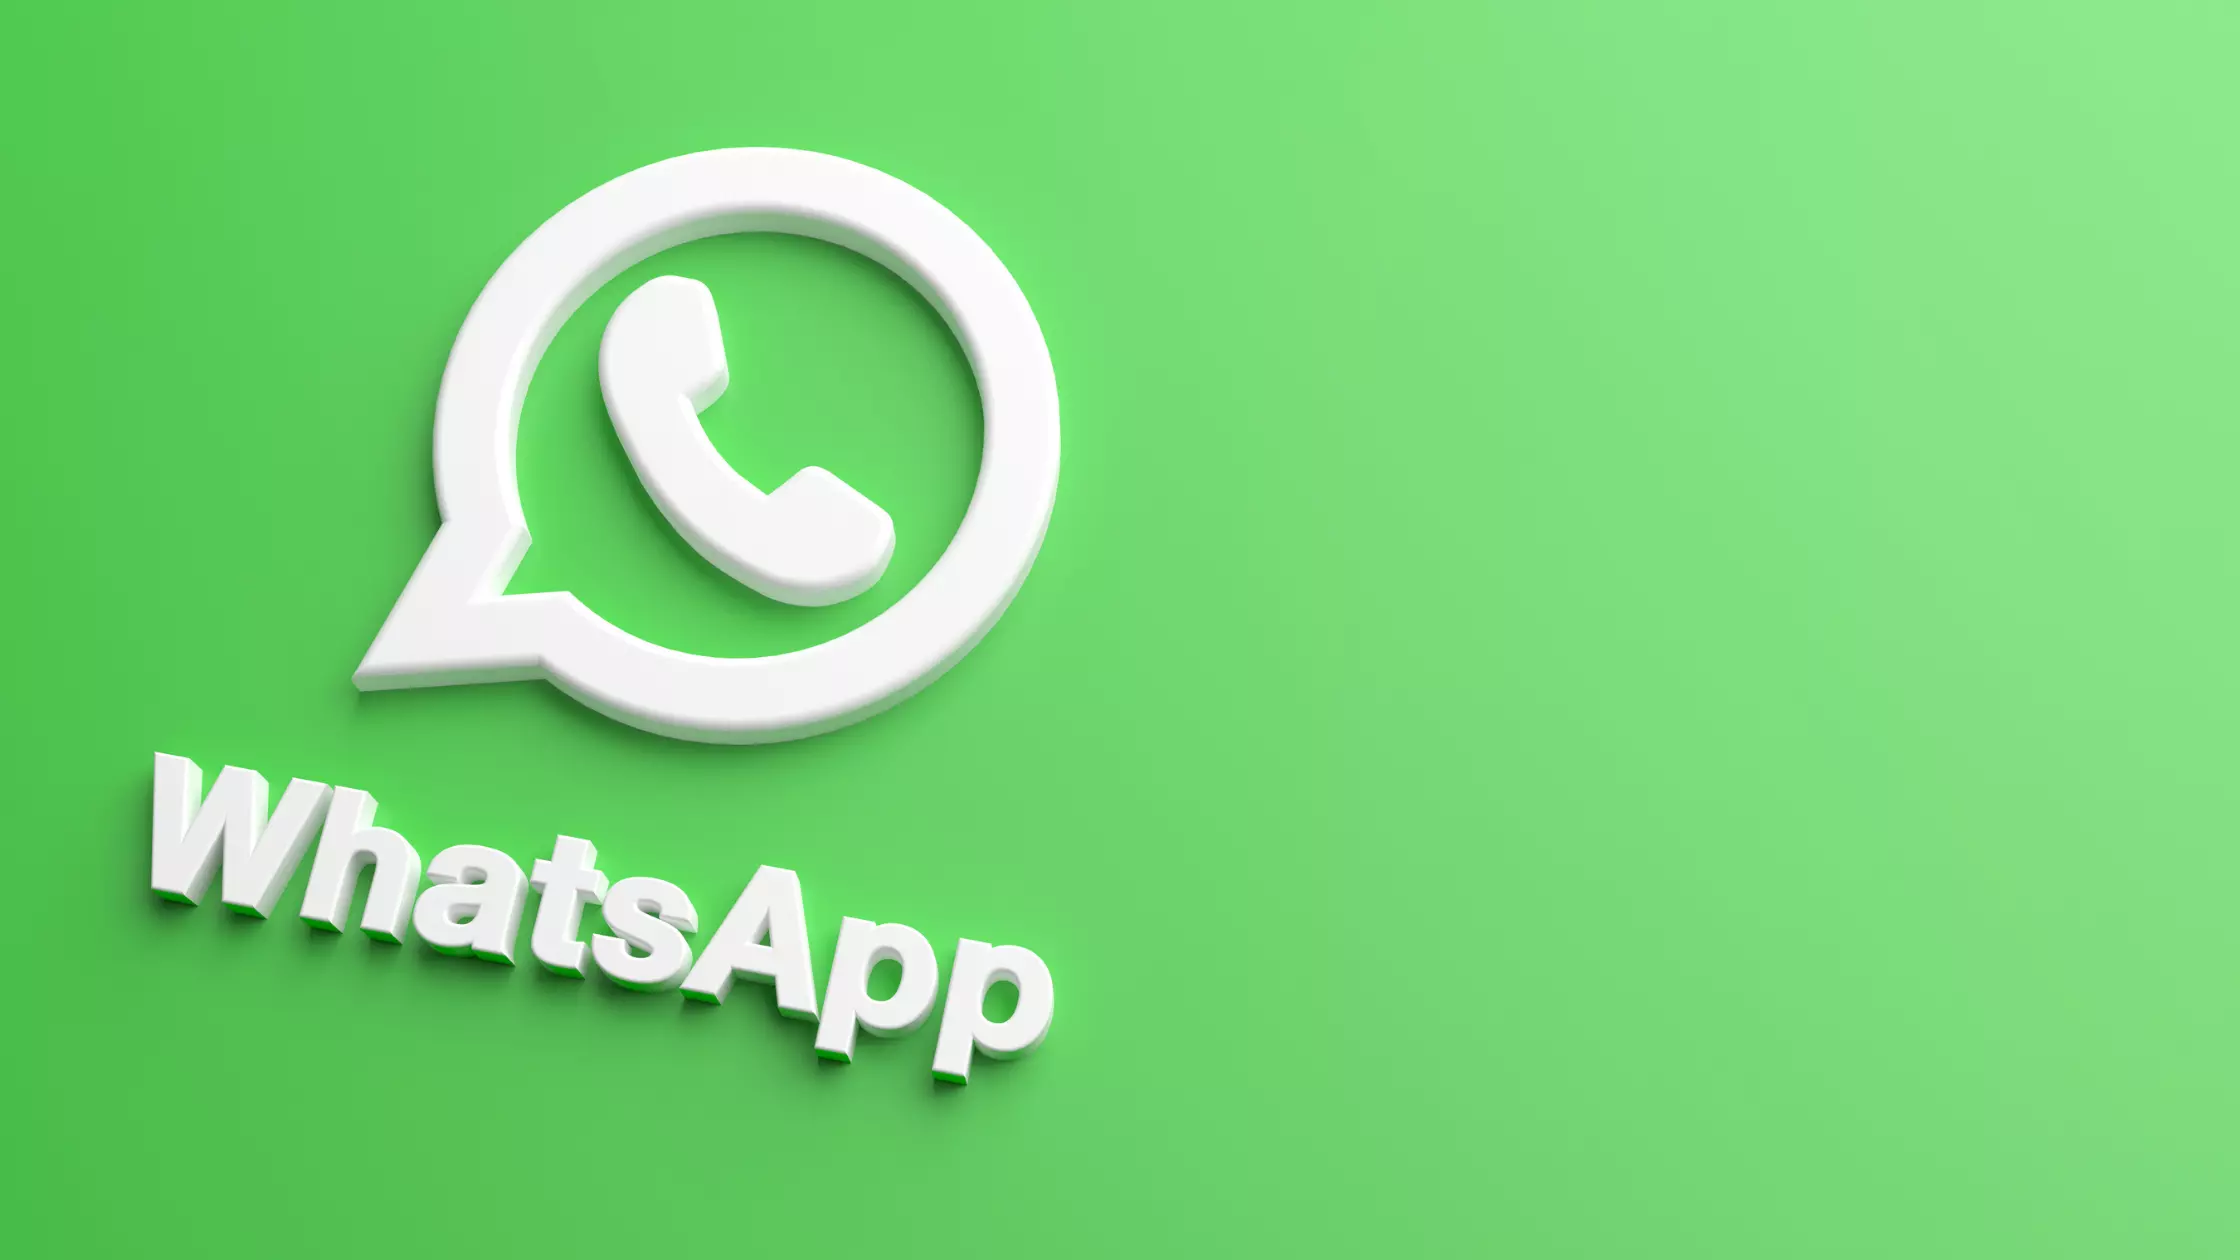 3 WhatsApp tricks that will take your messaging to the next level